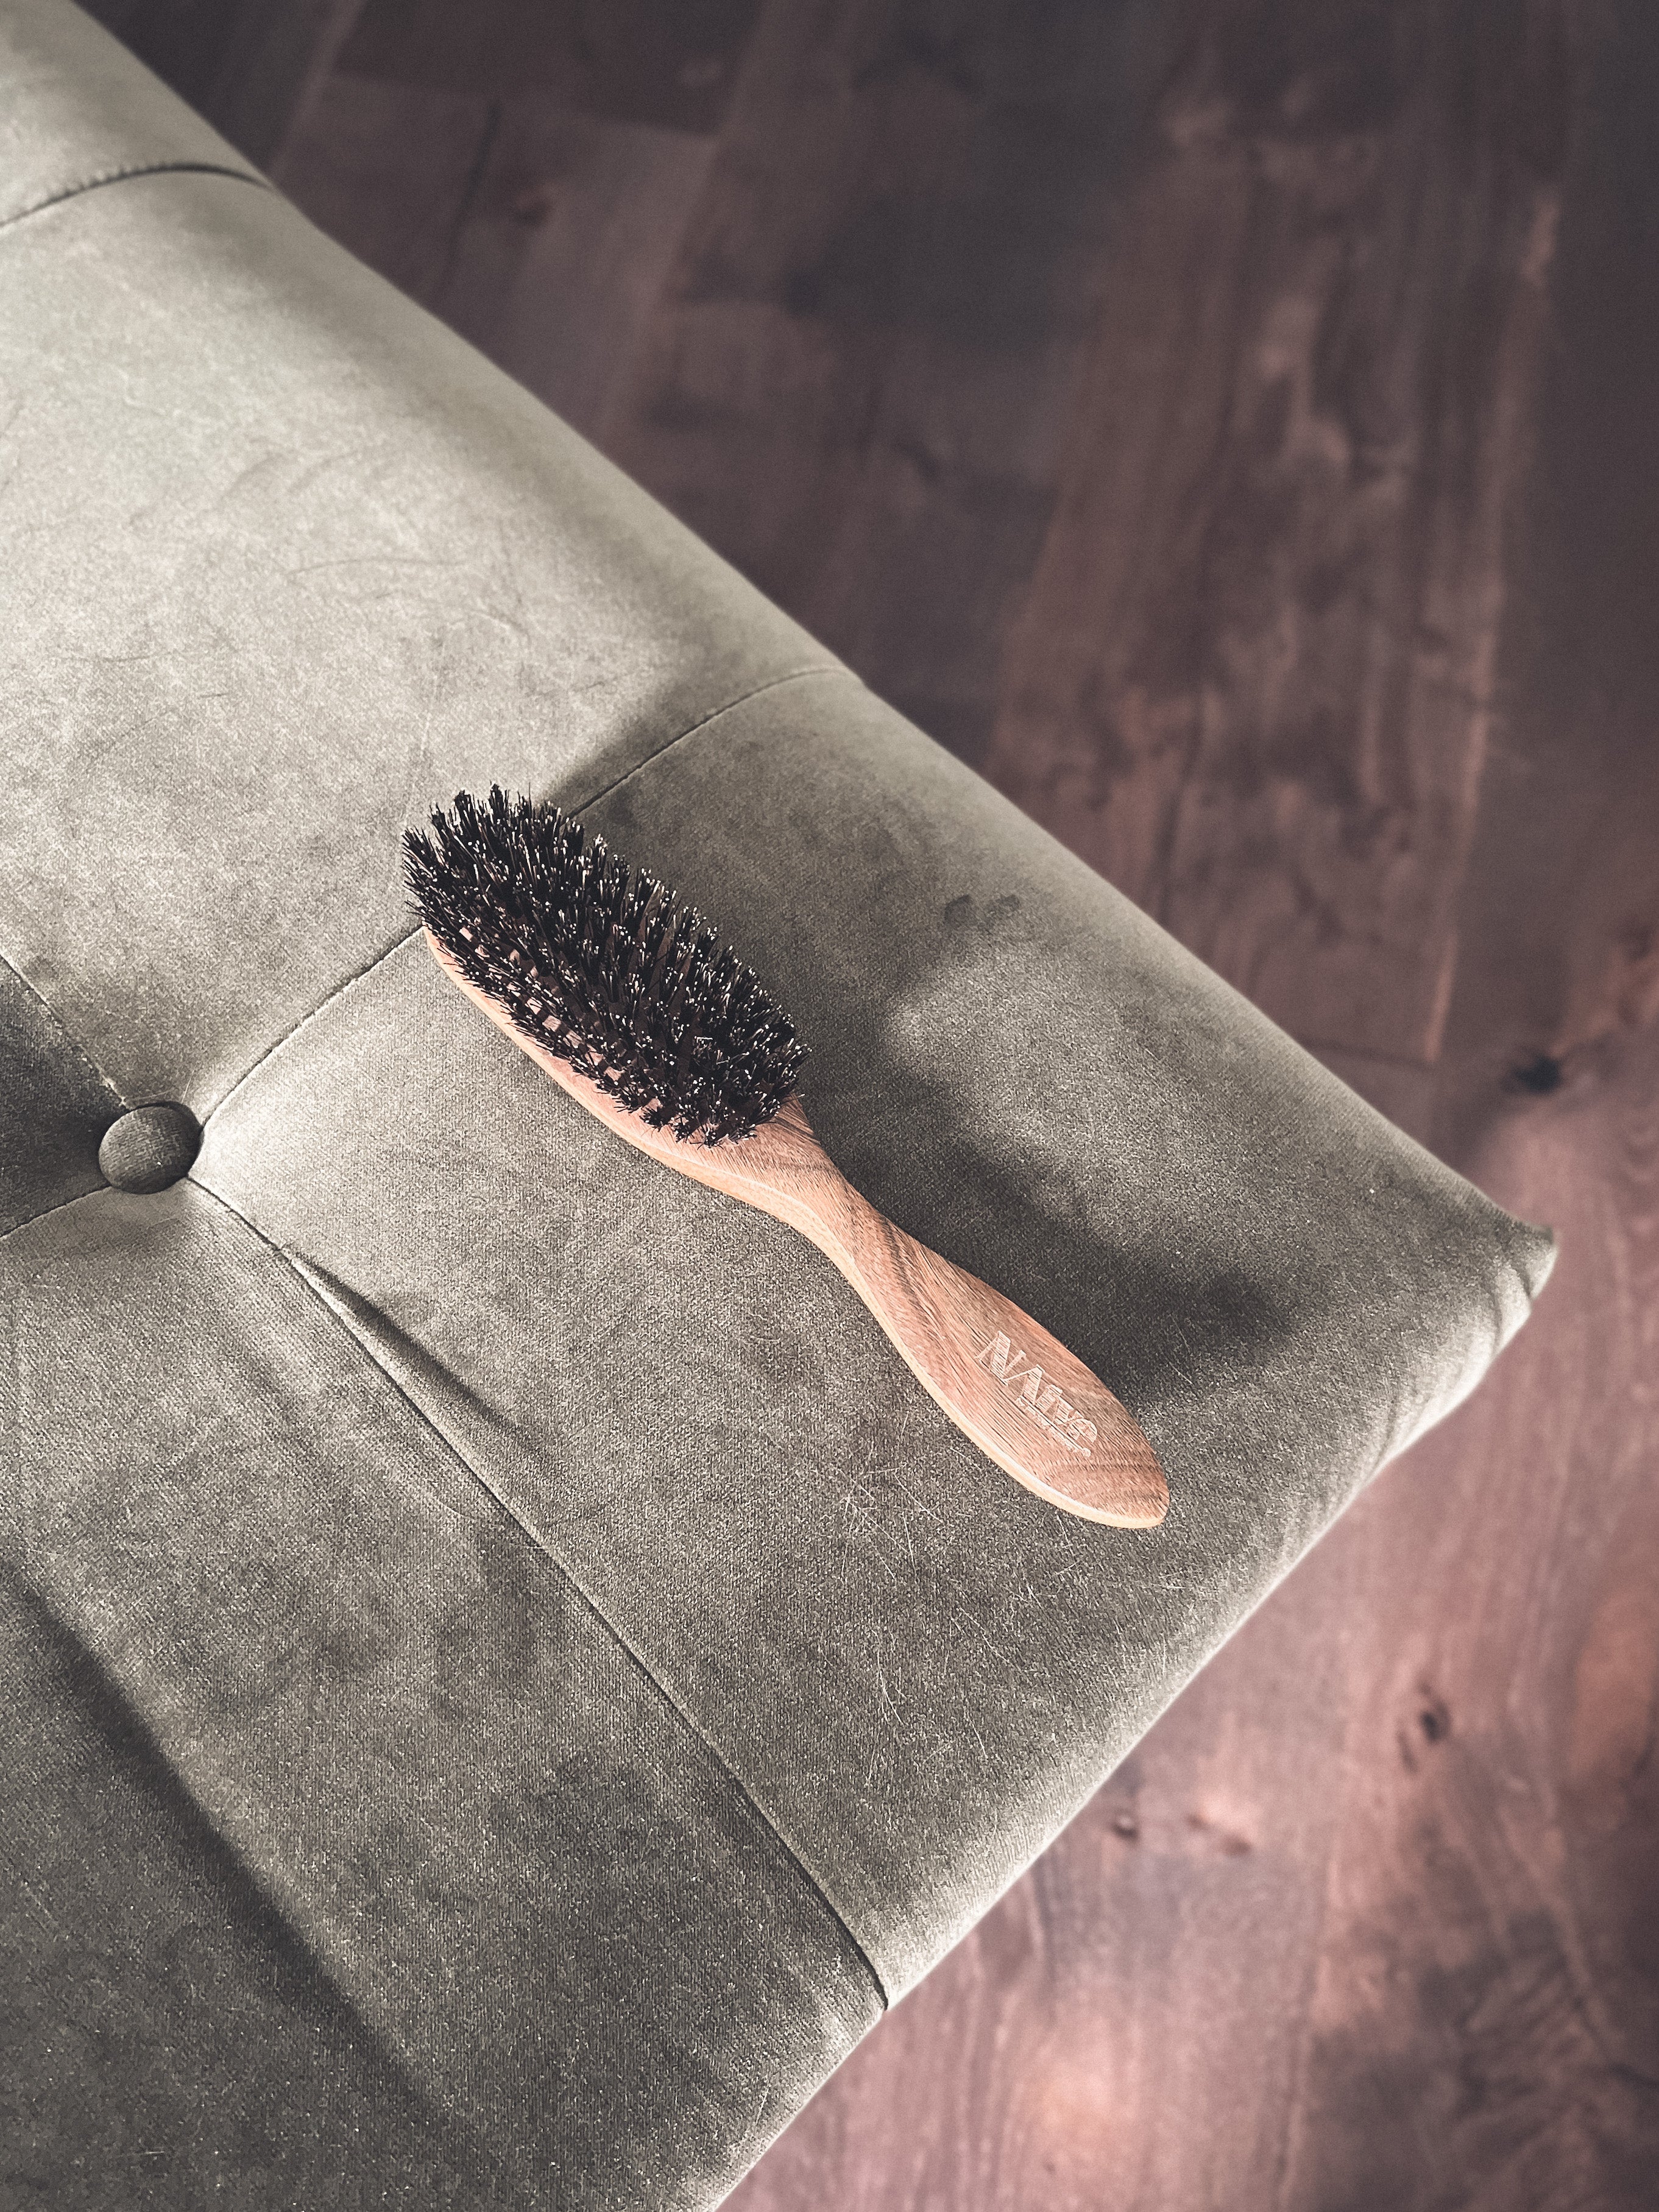 wooden boar bristle sculpting brush by natve on a gray couch with a wood floor